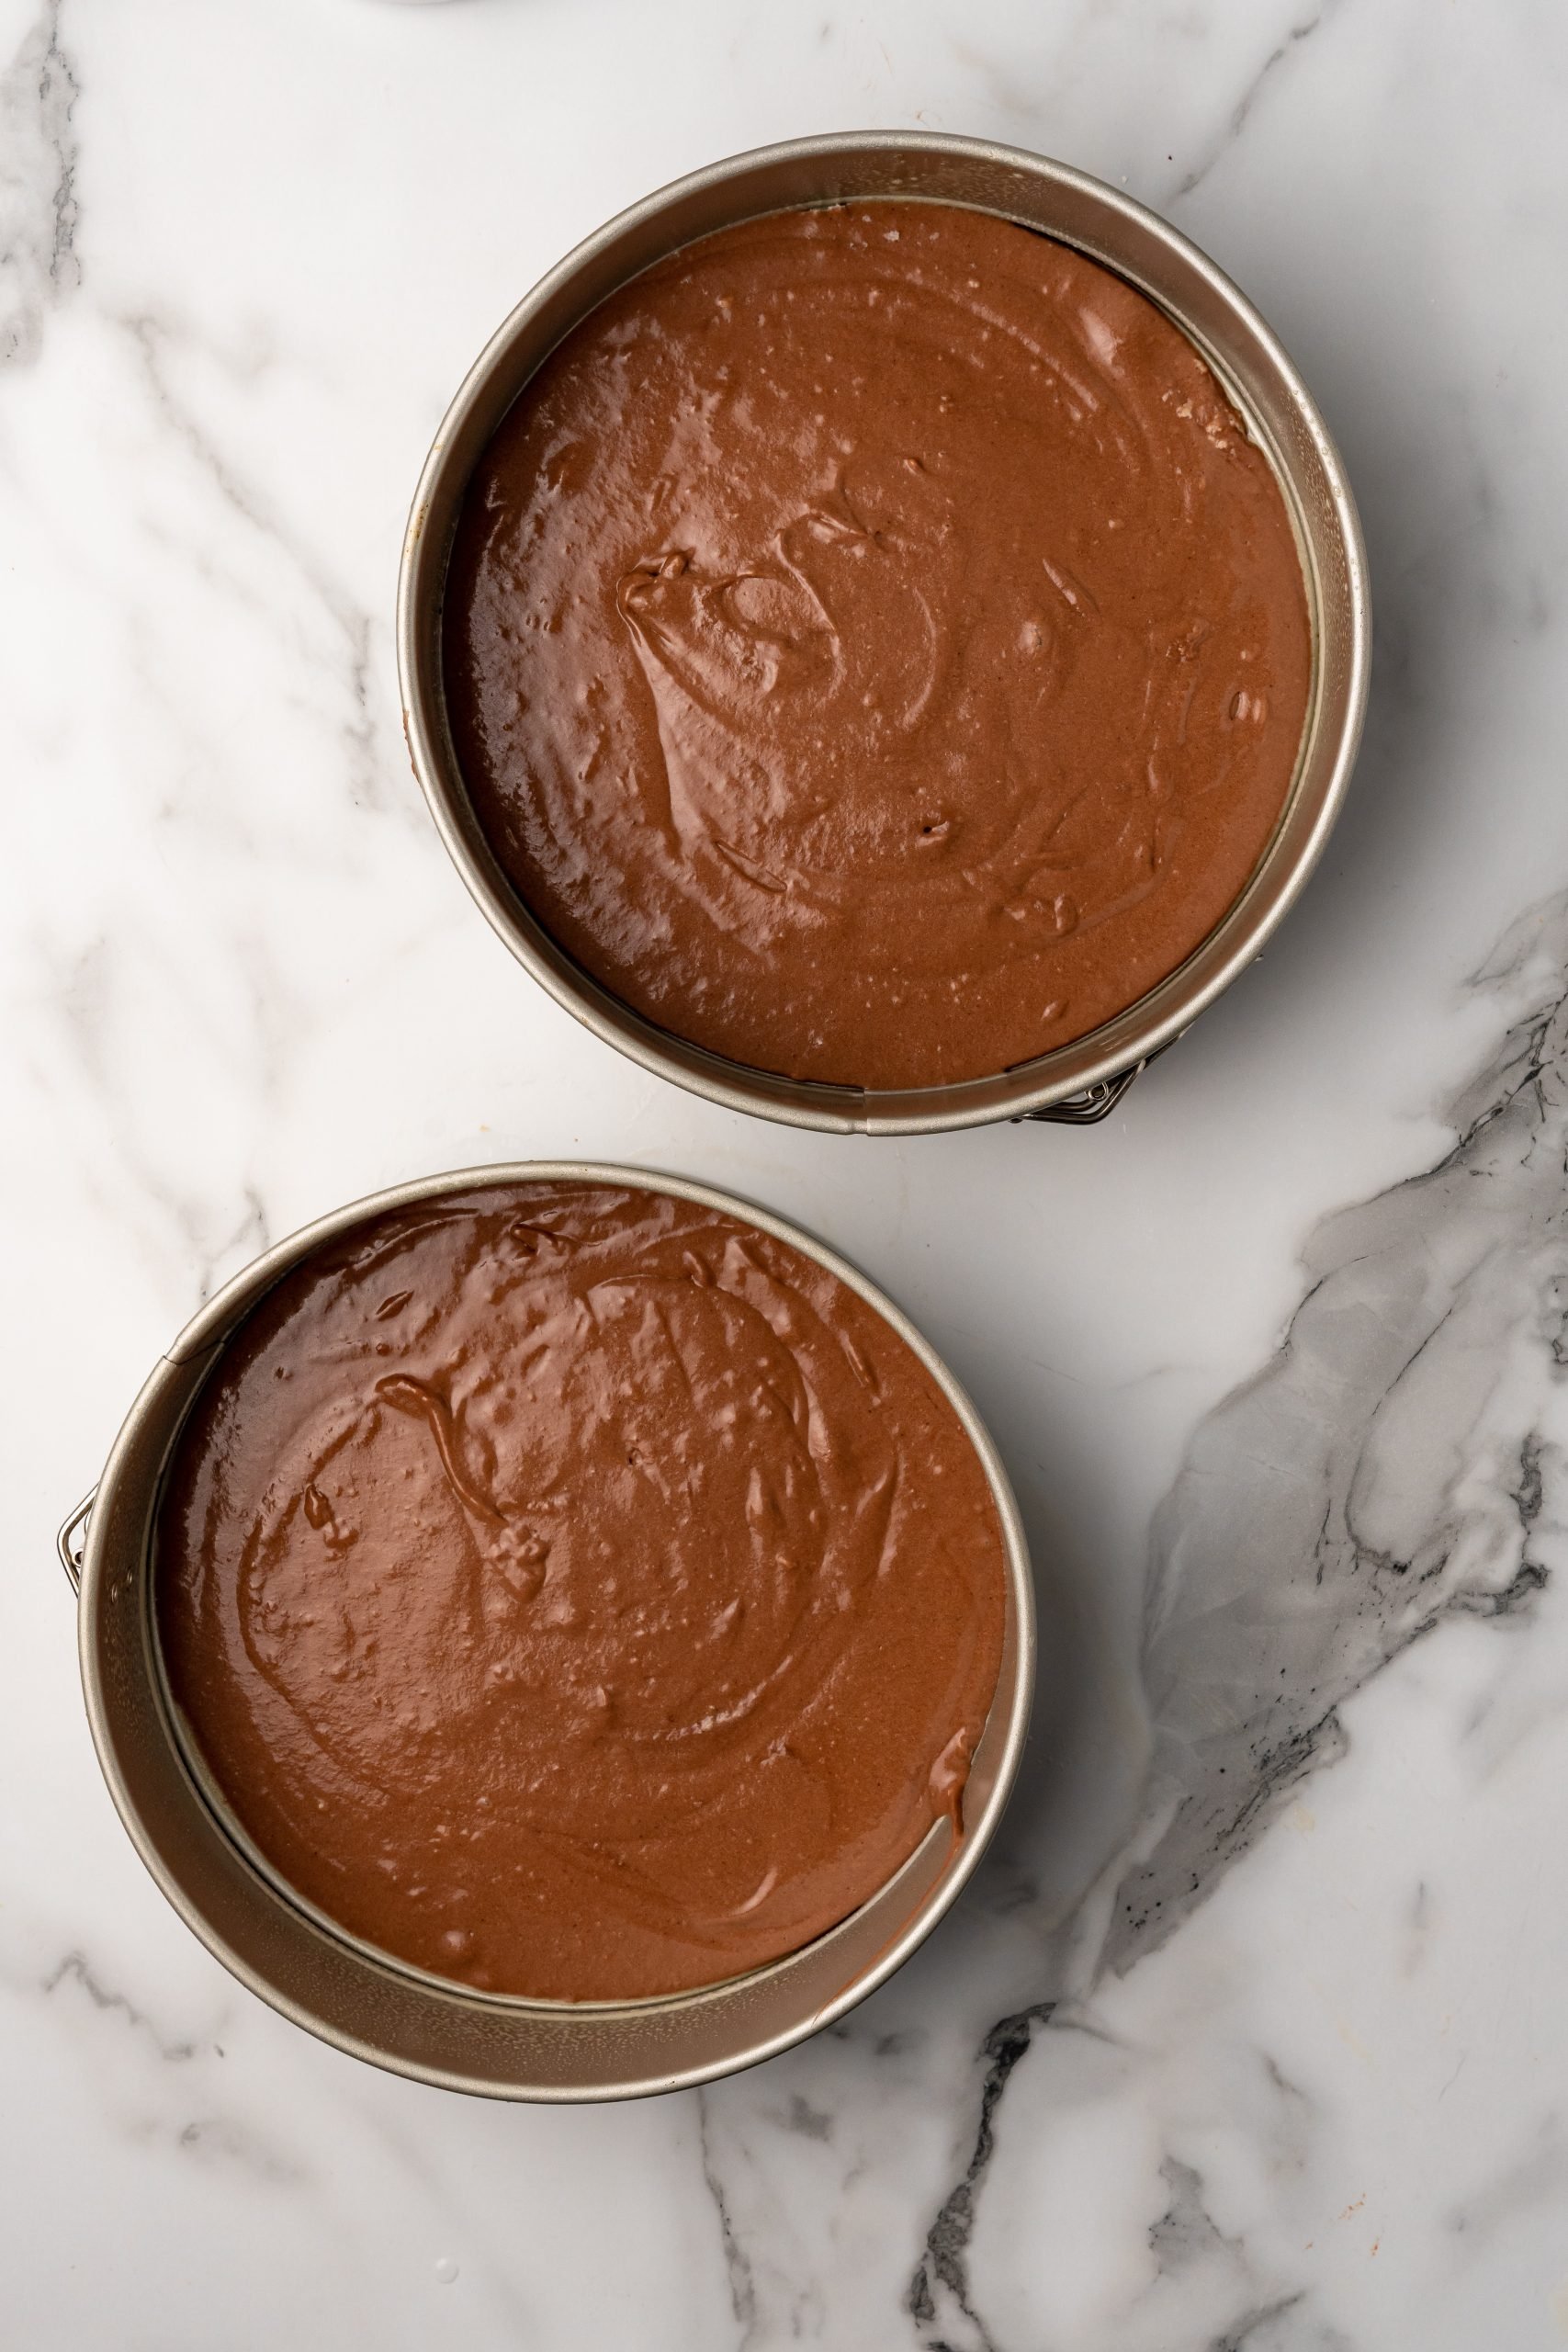 chocolate cake batter in two 9 inch round cake pans